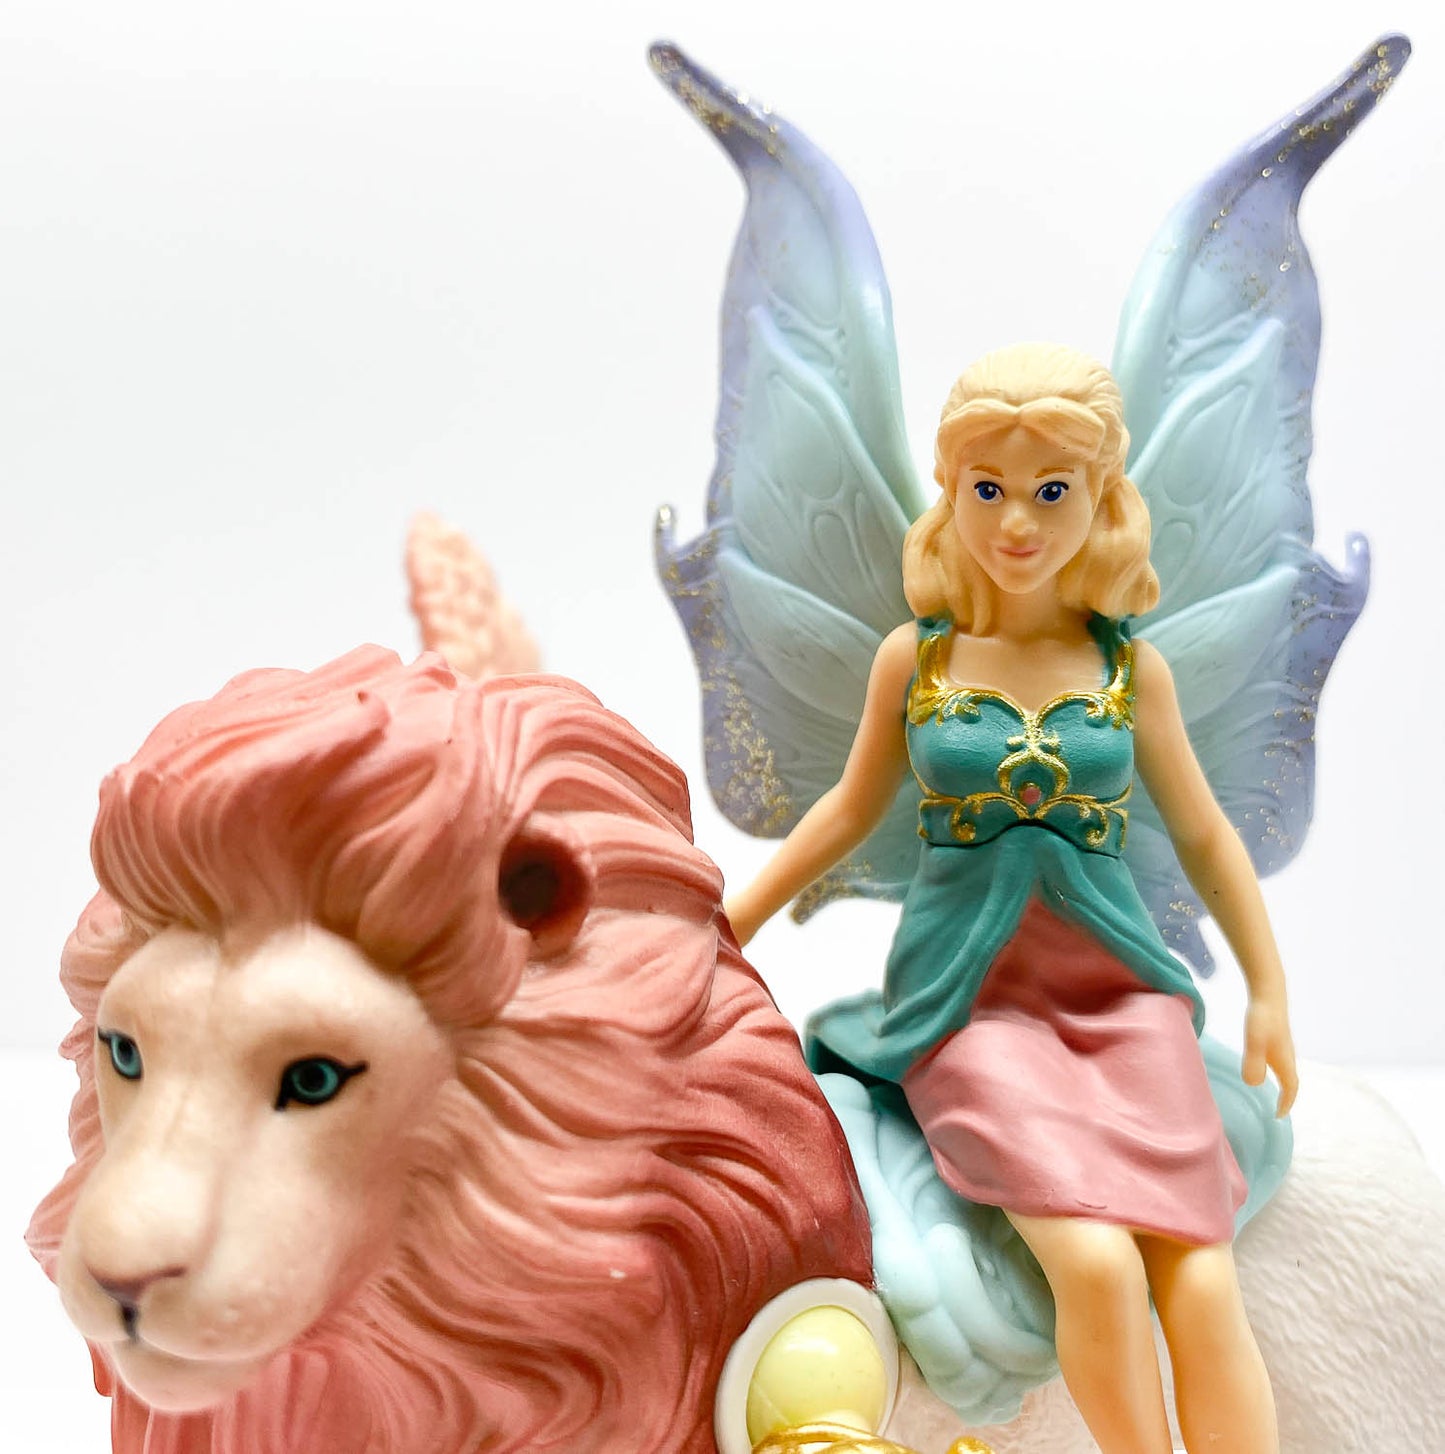 Fairy on Winged Lion